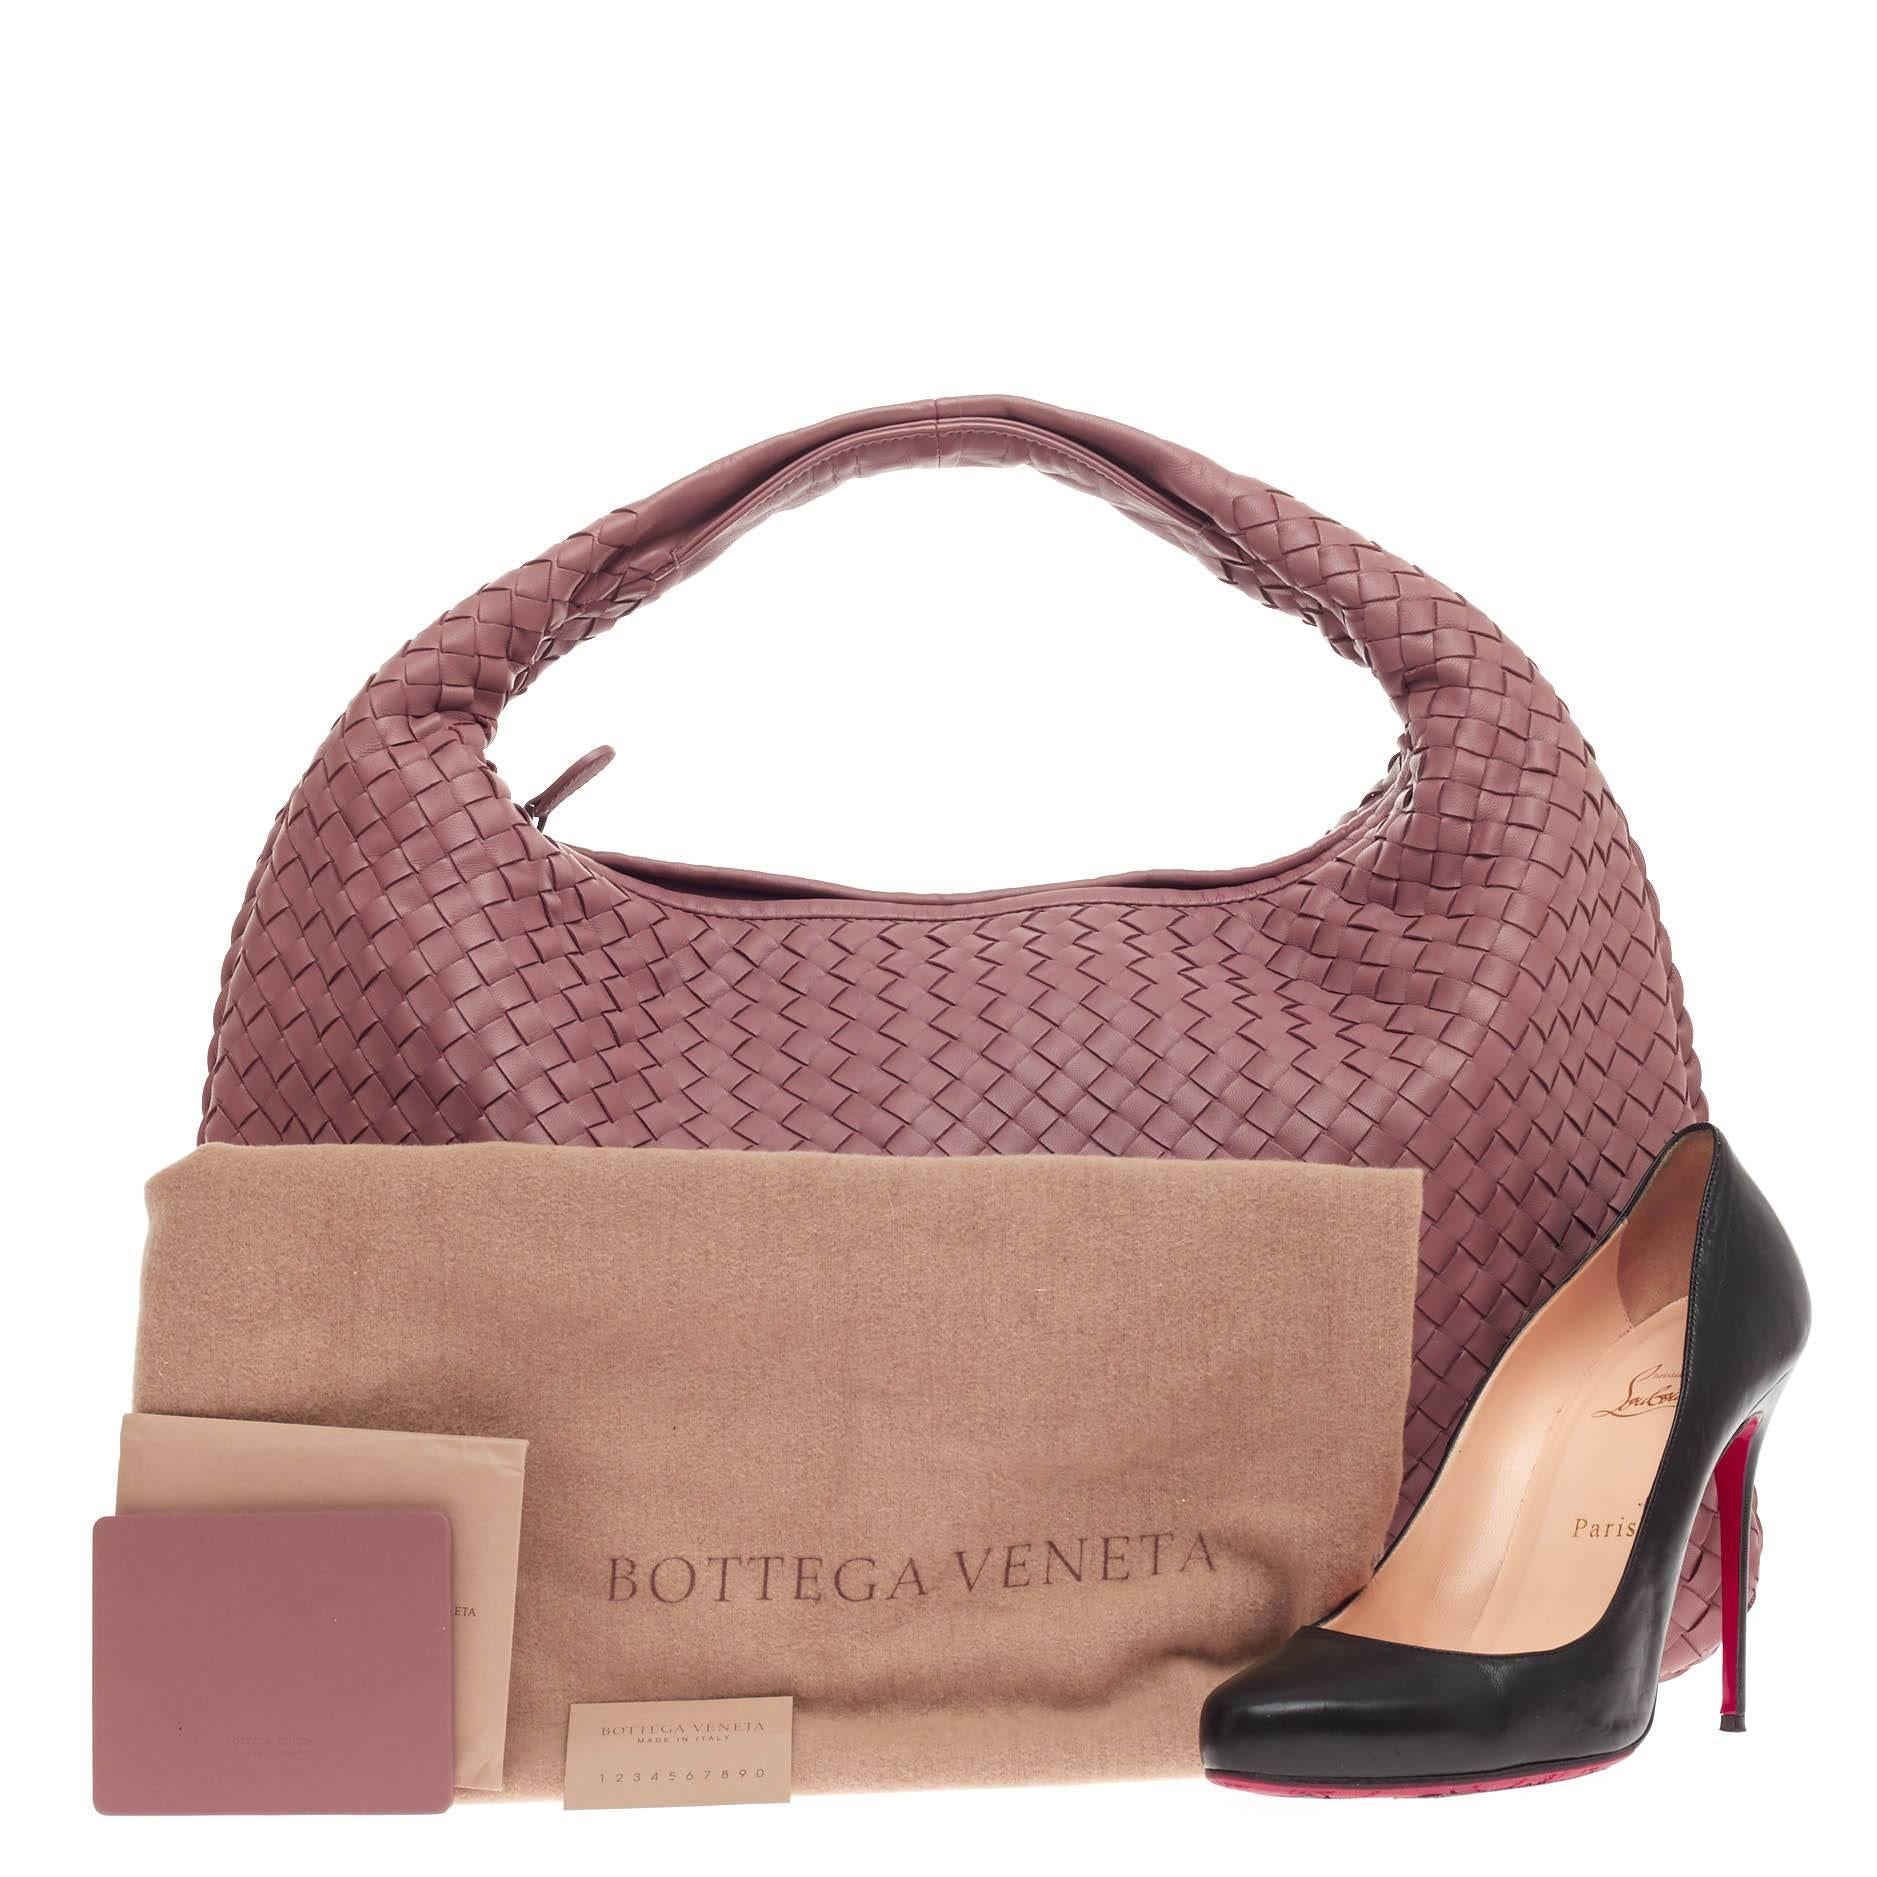 This authentic Bottega Veneta Veneta Hobo Intrecciato Nappa Large is a timelessly elegant bag with a casual silhouette. Crafted from pink mauve nappa leather woven in Bottega Veneta's signature intrecciato method, this versatile, highly-crafted hobo